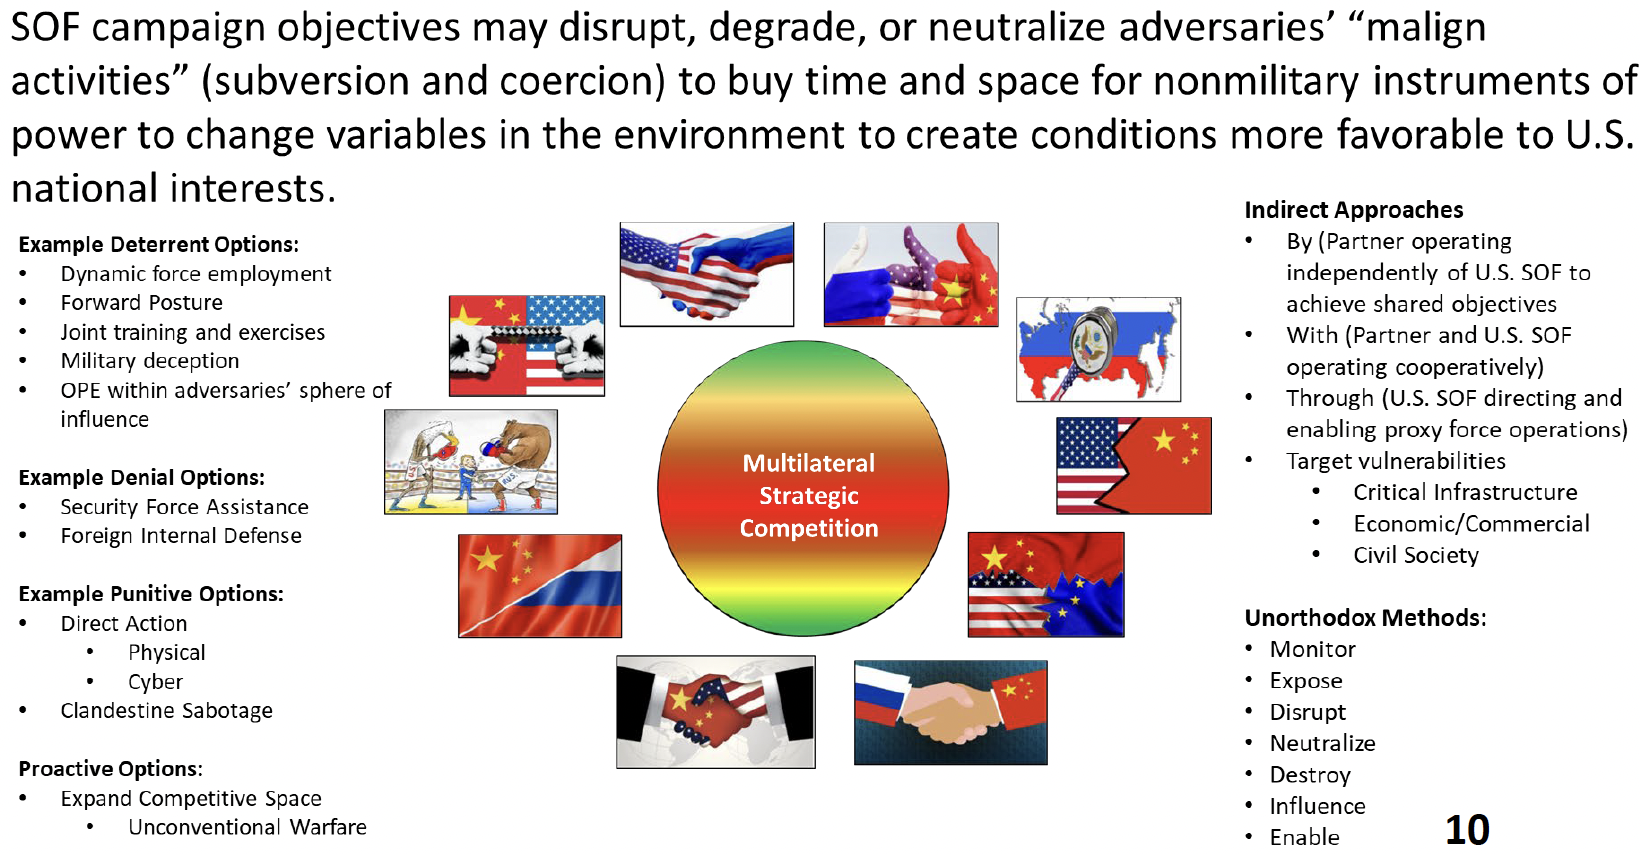 Image detailing SOF campaign objectives may disrupt, degrade, or neutralize adversaries' "malign activities" (subversion and coercion) to buy time and space for nonmilitary instruments of power to change variables in the environment to create conditions more favorable to U.S. national interests.